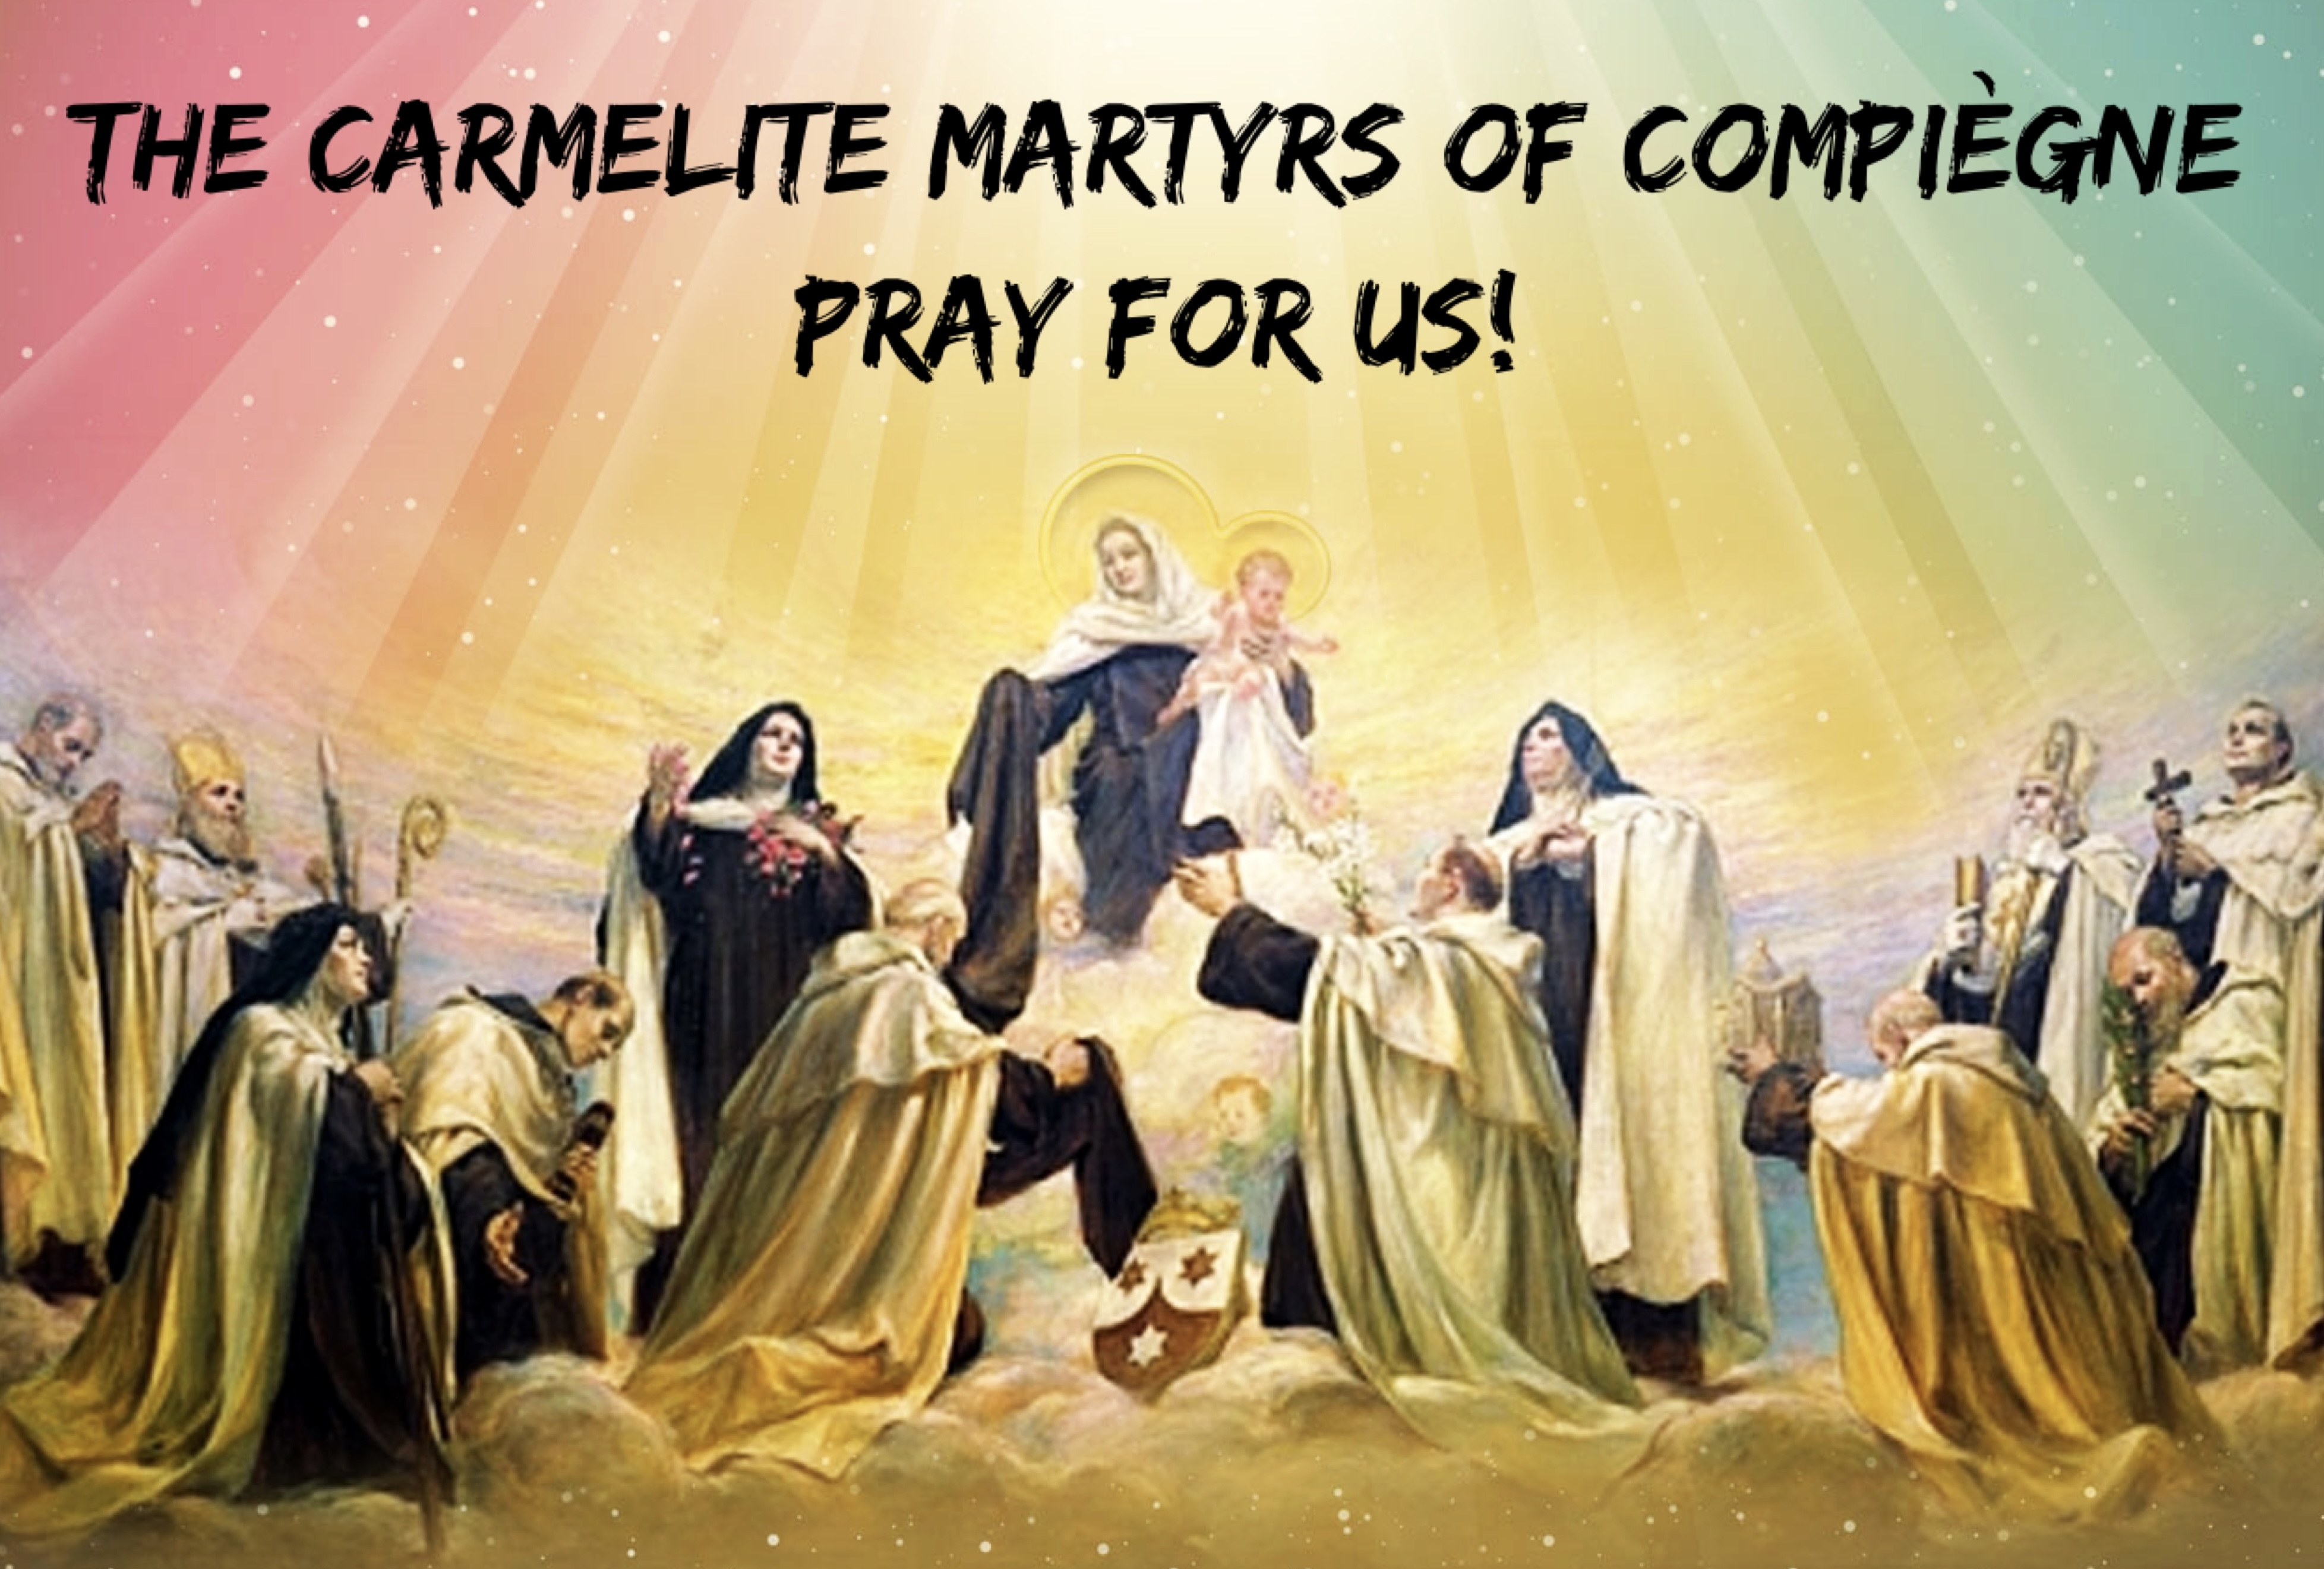 17th July - The Carmelite Martyrs of Compiègne